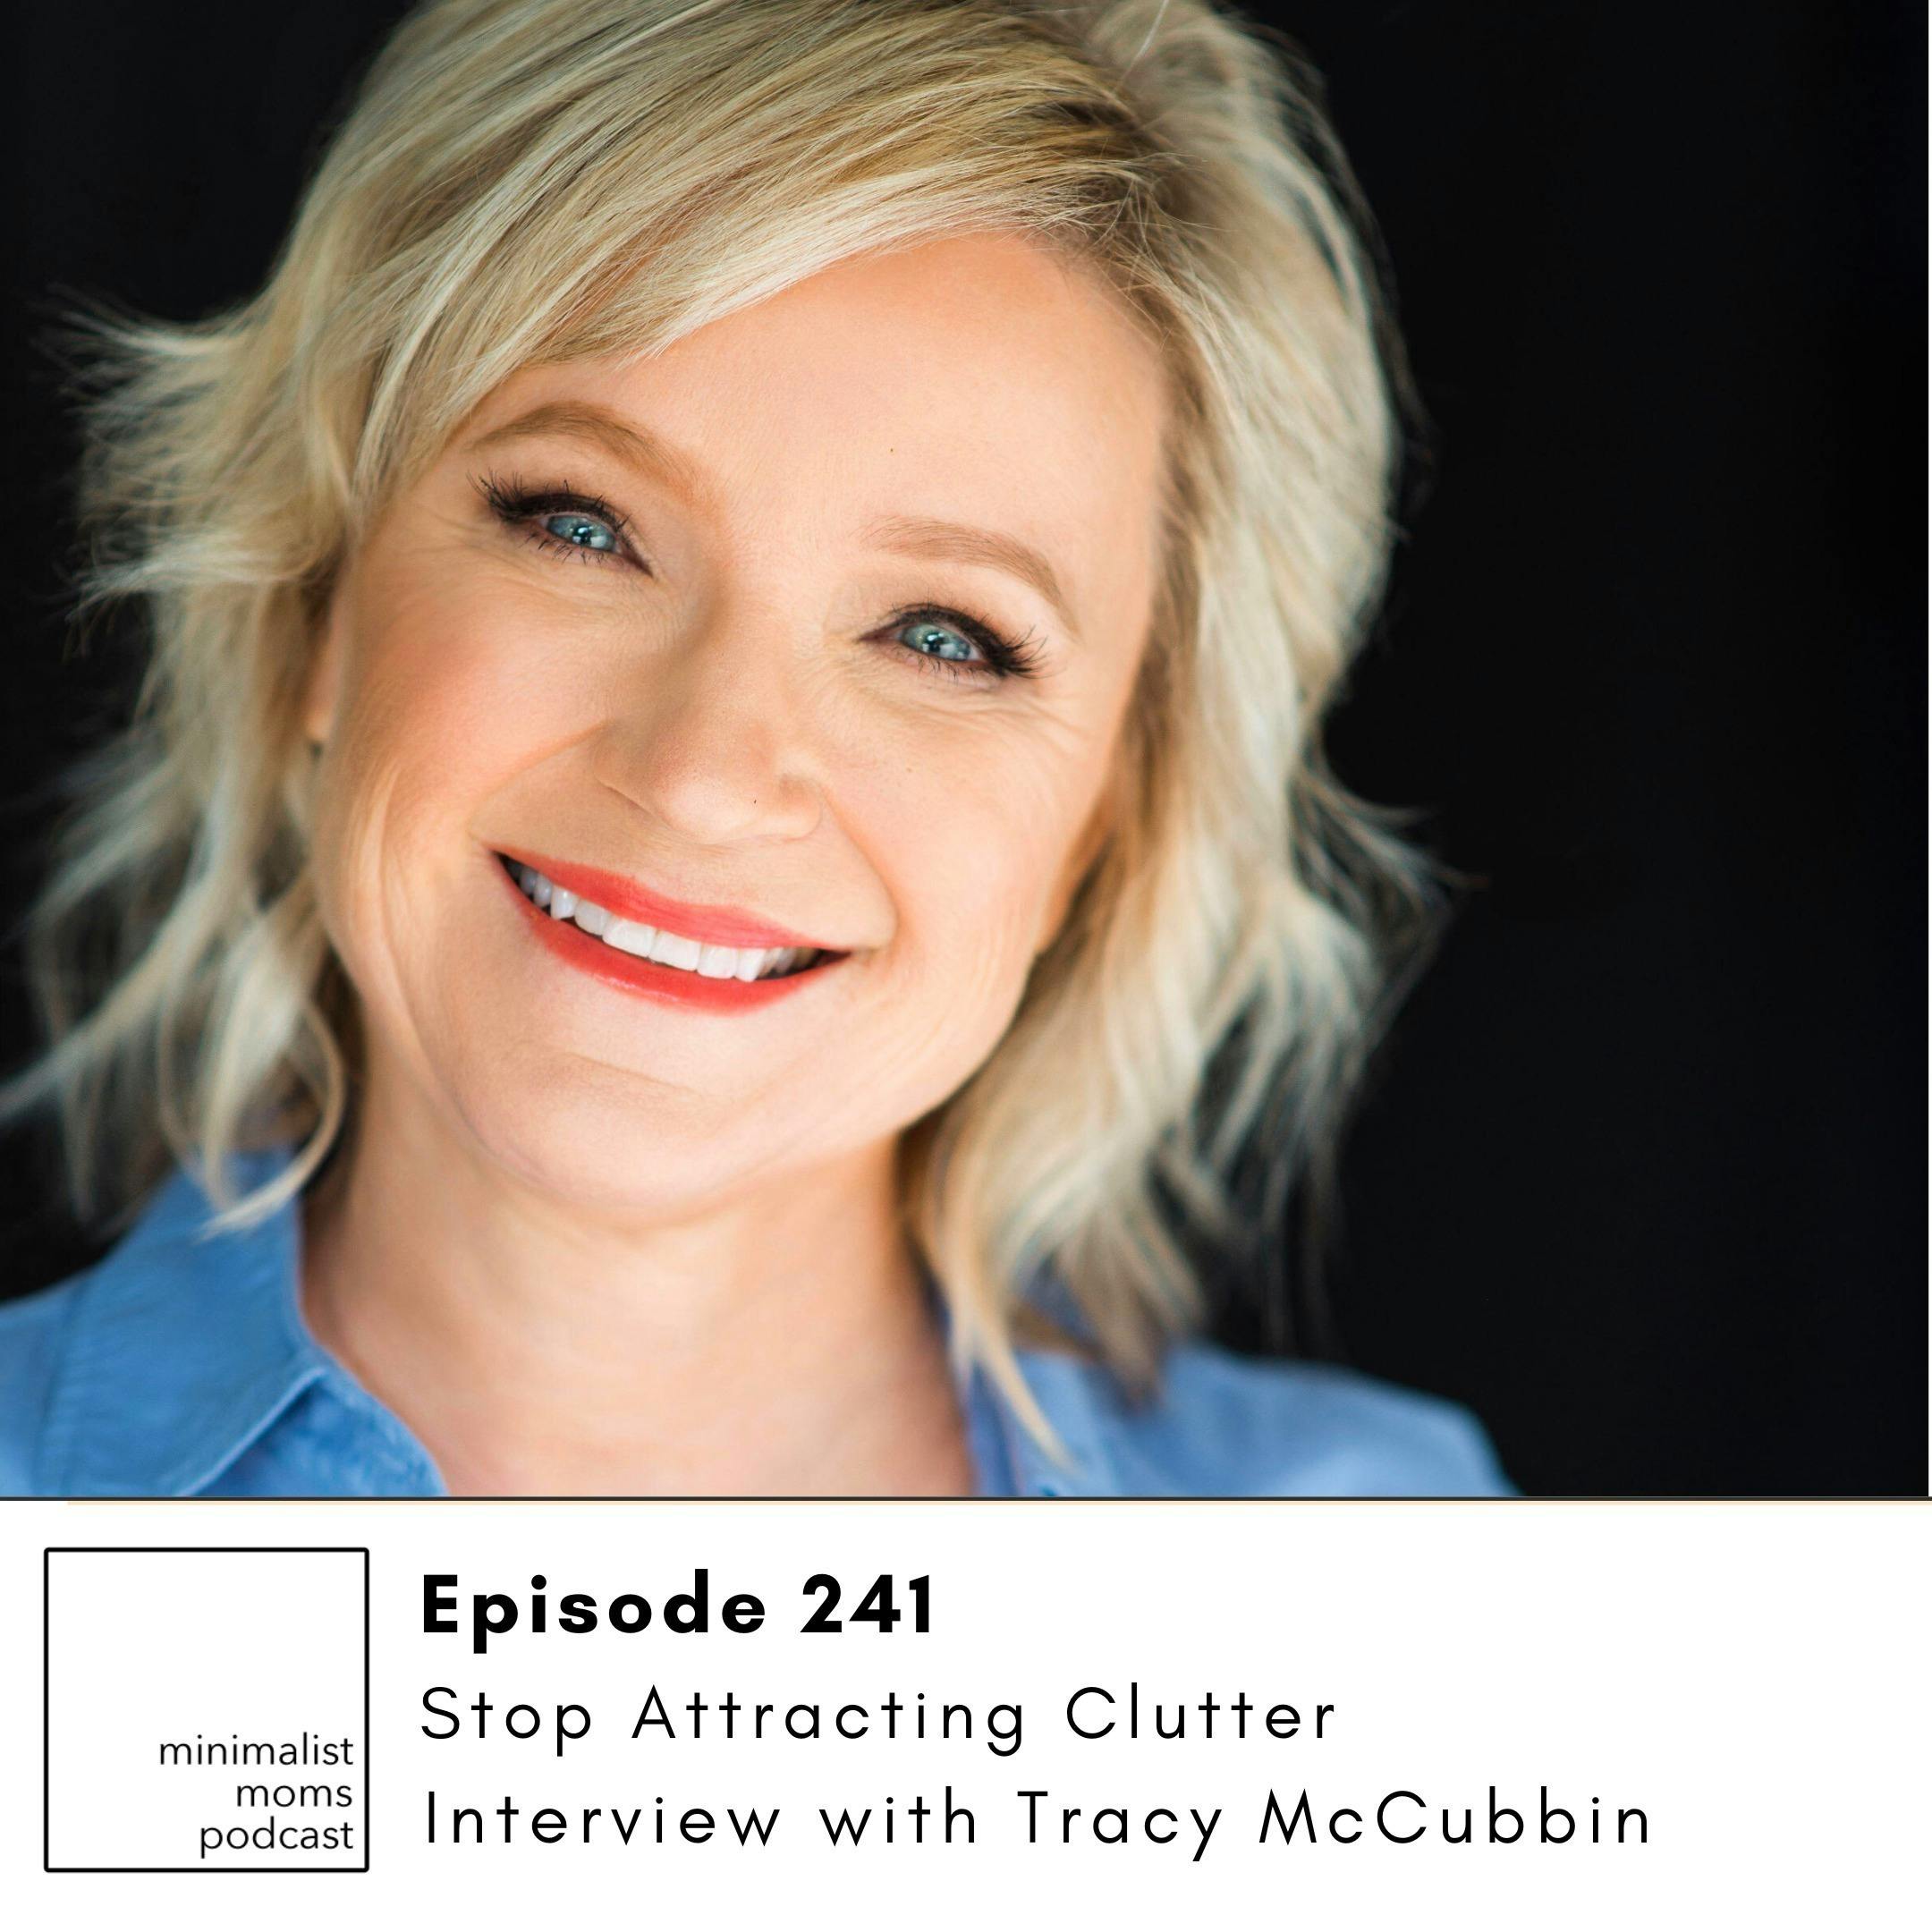 EP241: Stop Attracting Clutter with Tracy McCubbin